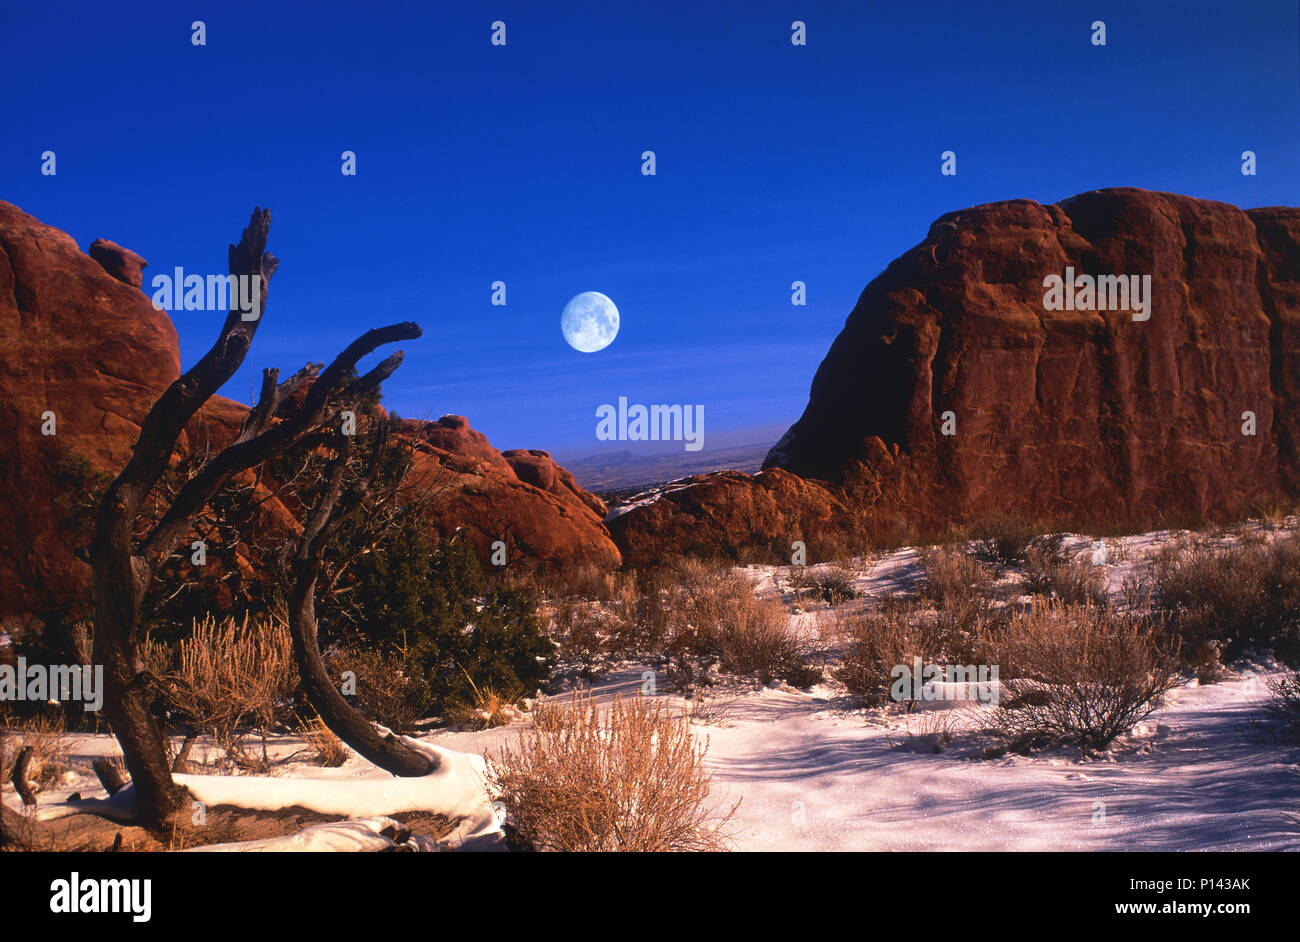 Arches National Park: view of distant horizon through rock formations with full moon over snow covered desert in late light, near Moab, Utah, USA Stock Photo